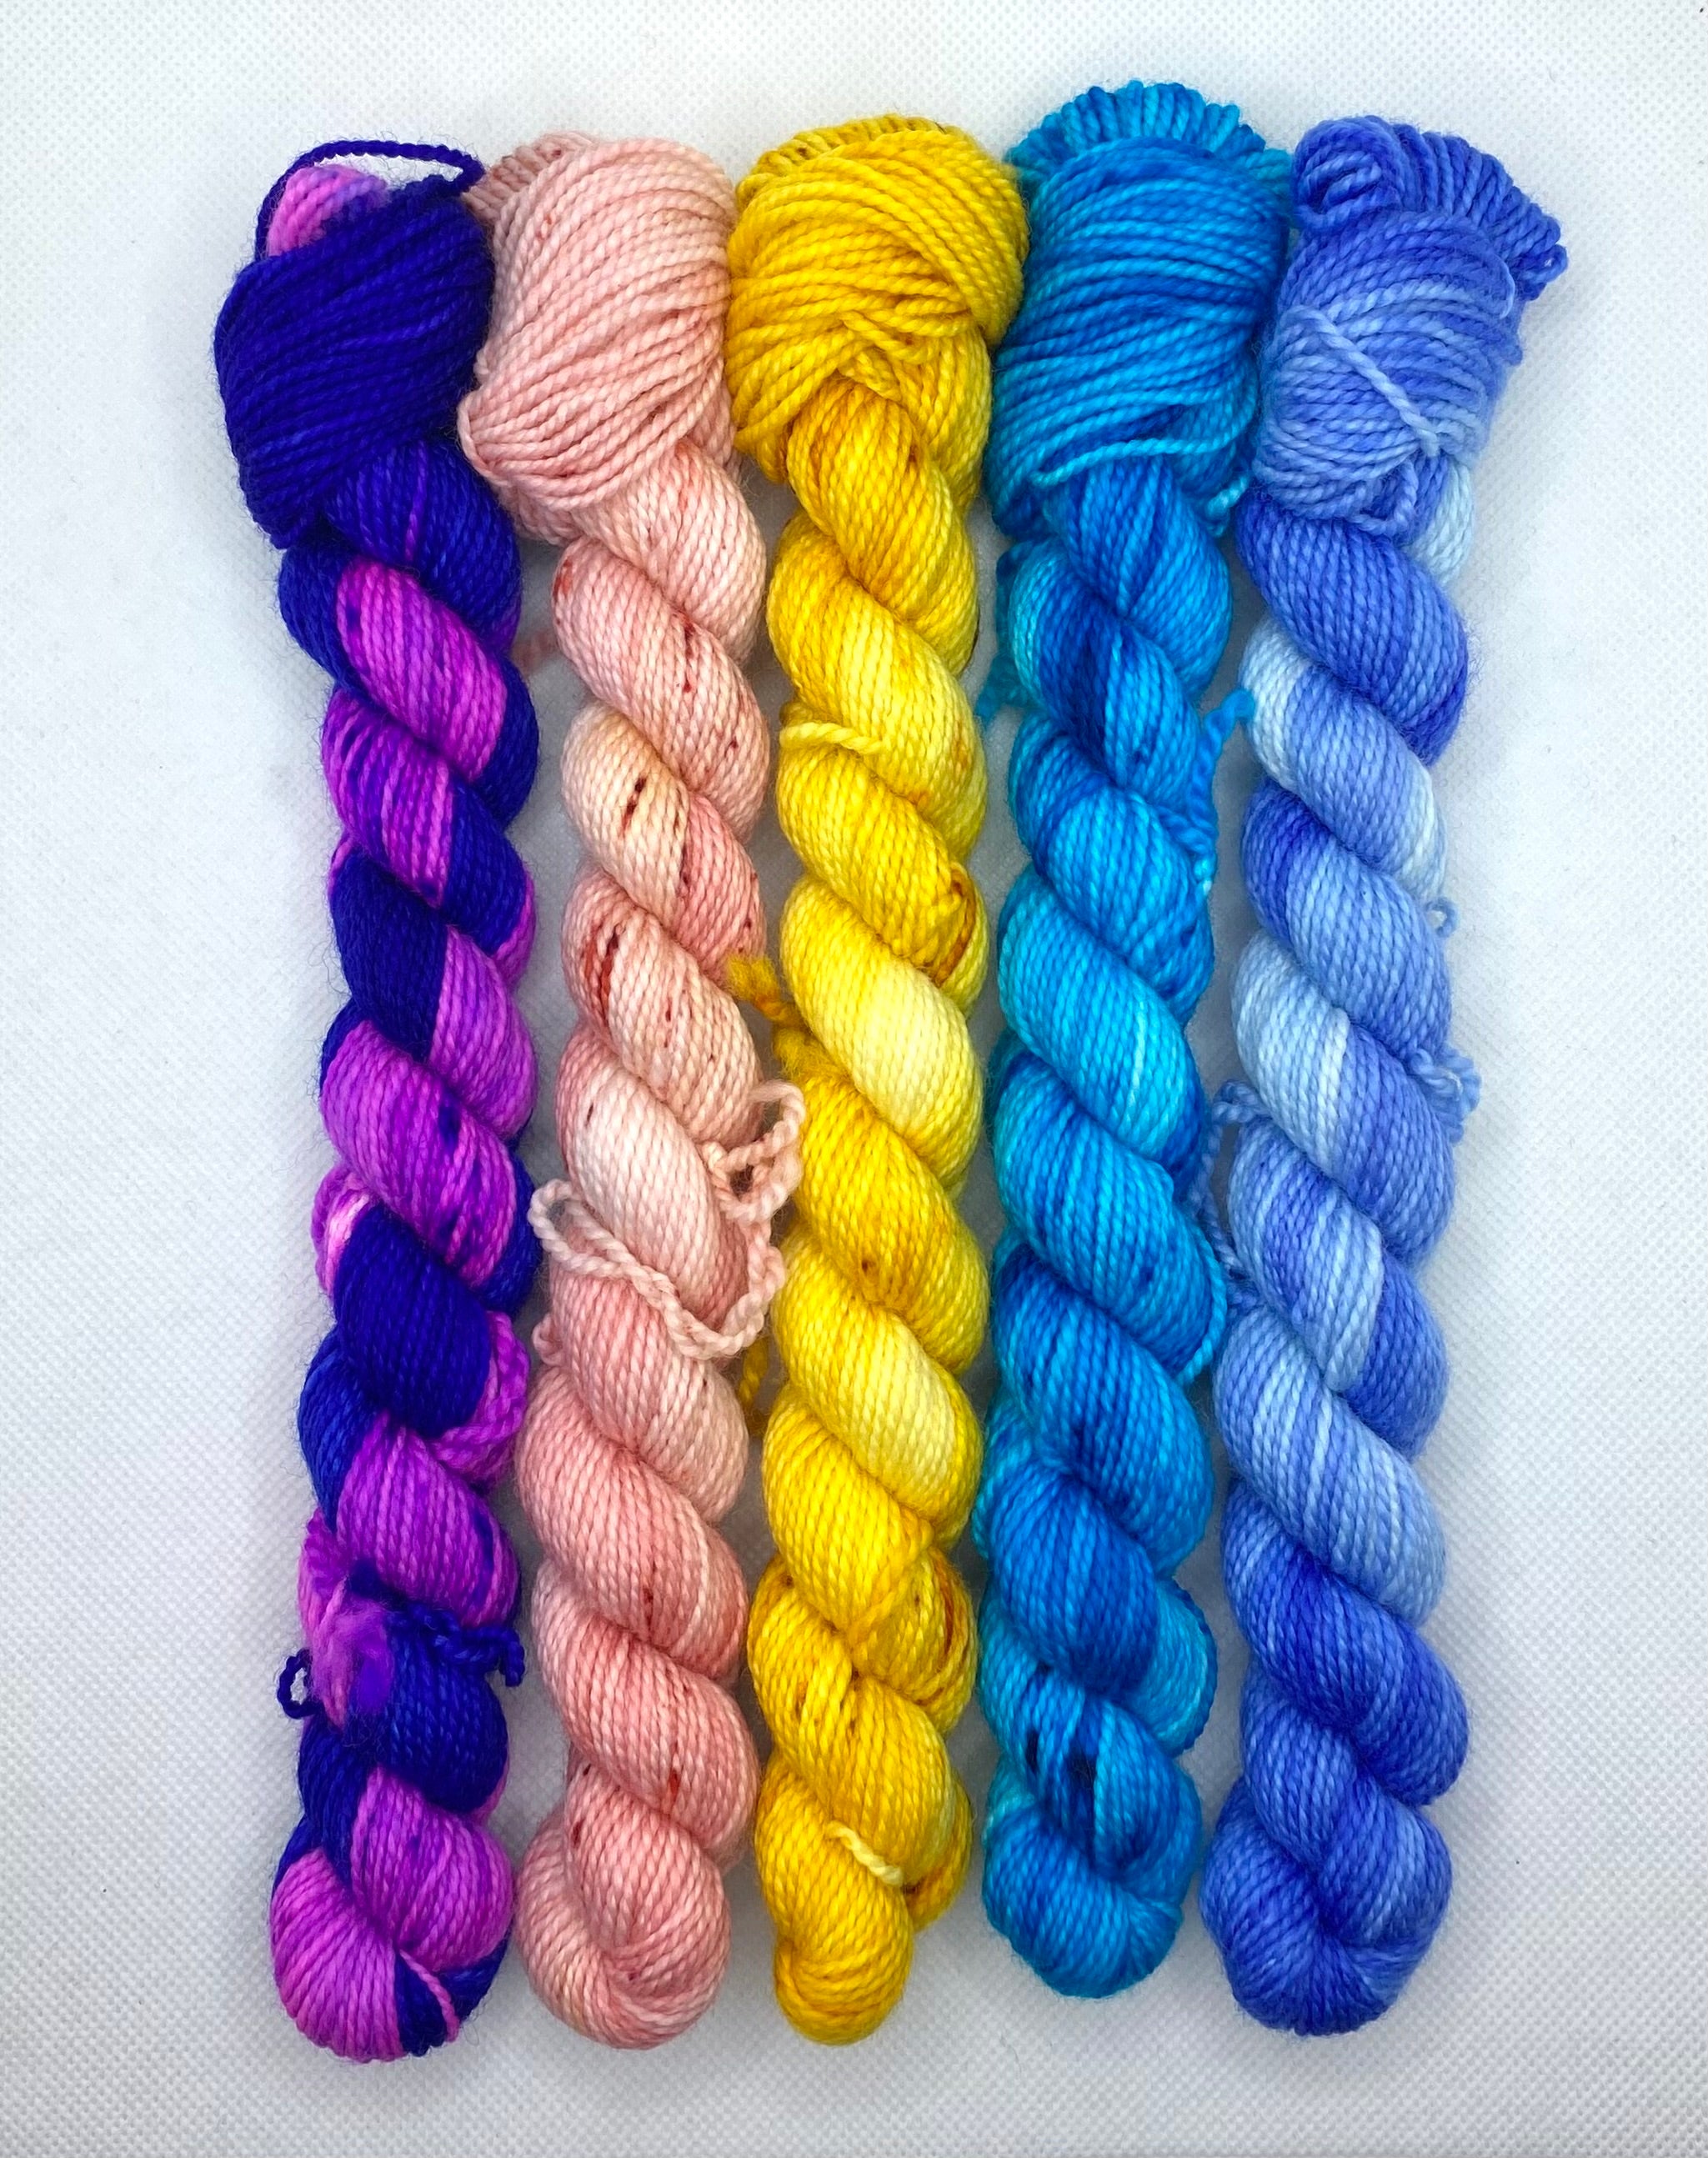 “Poor Things” -Inspired Mini Skein Set of Hand Dyed Yarn